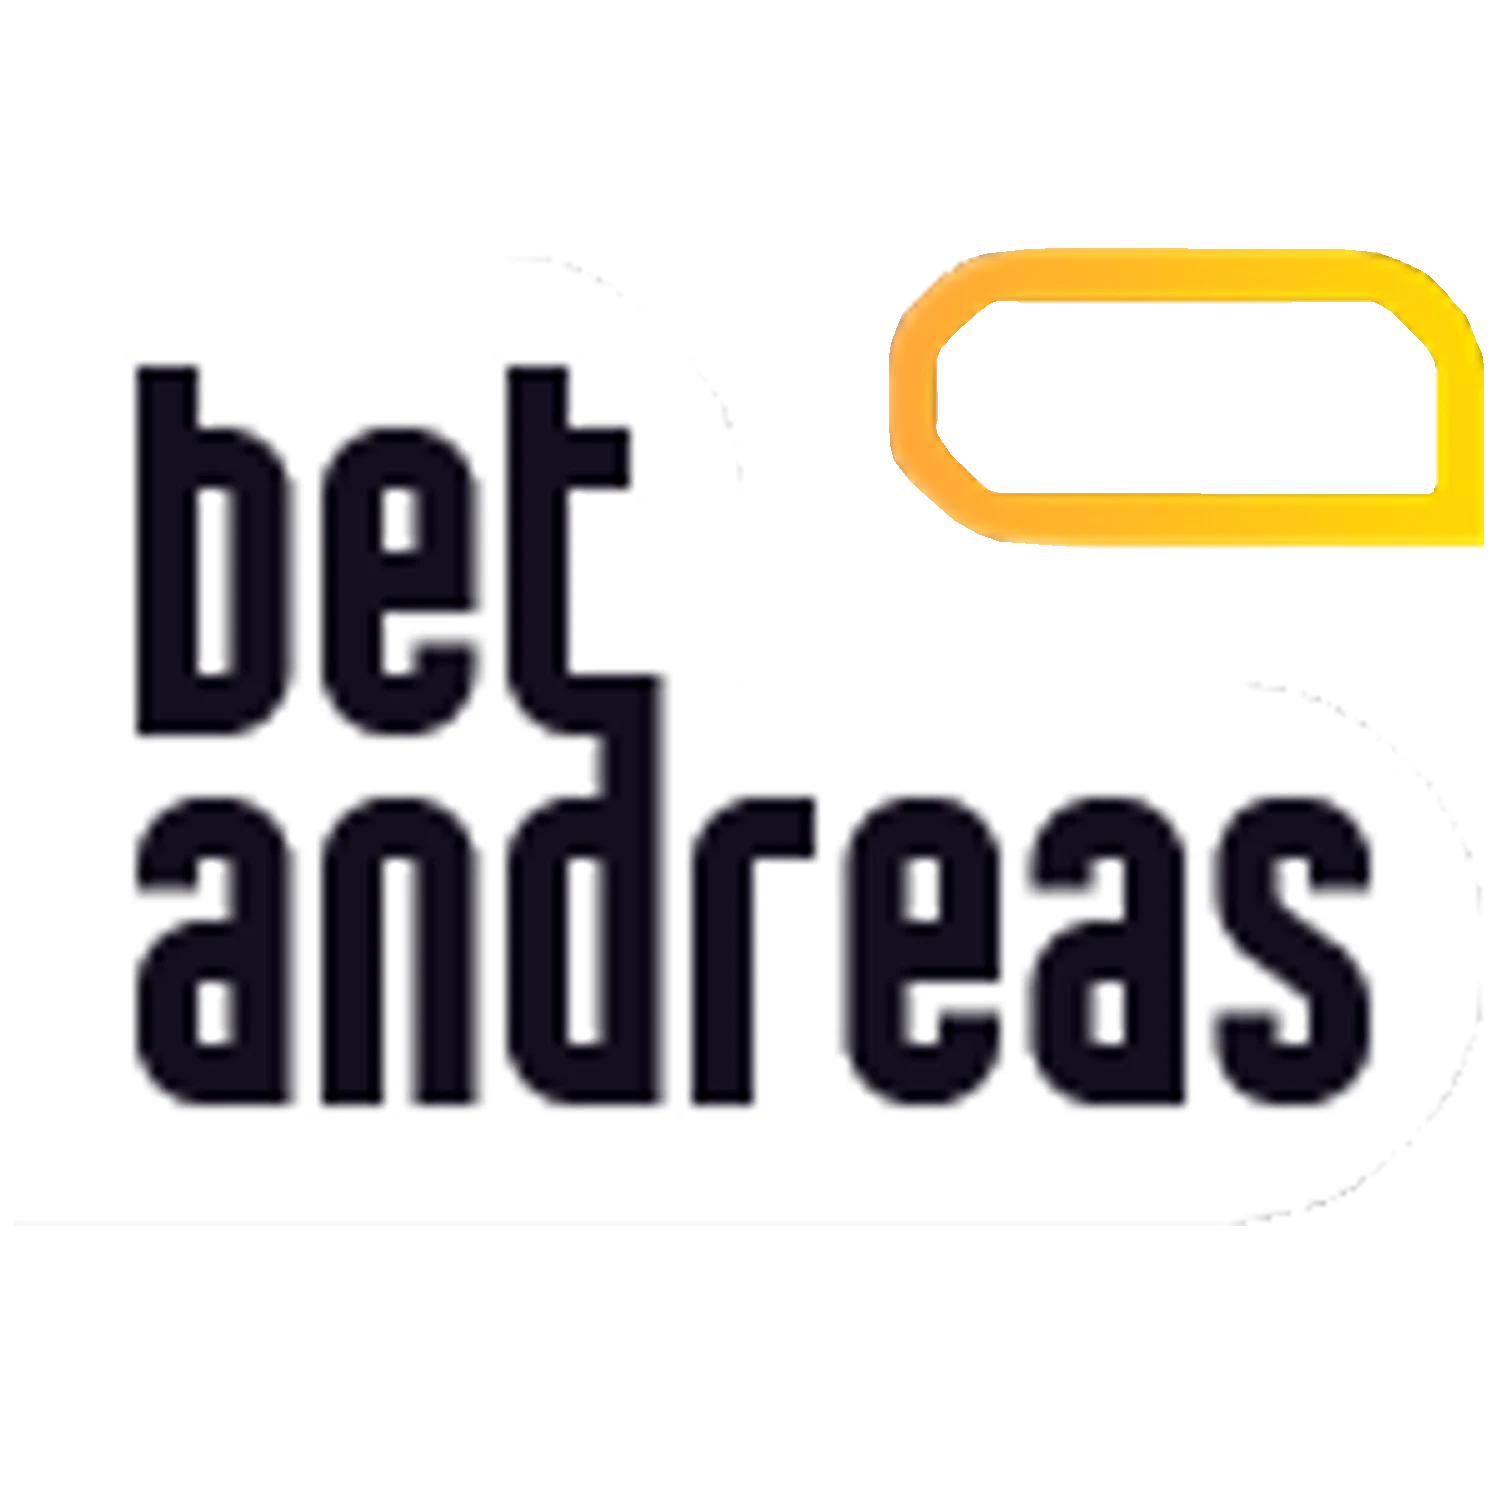 Play and win with BetAndreas.